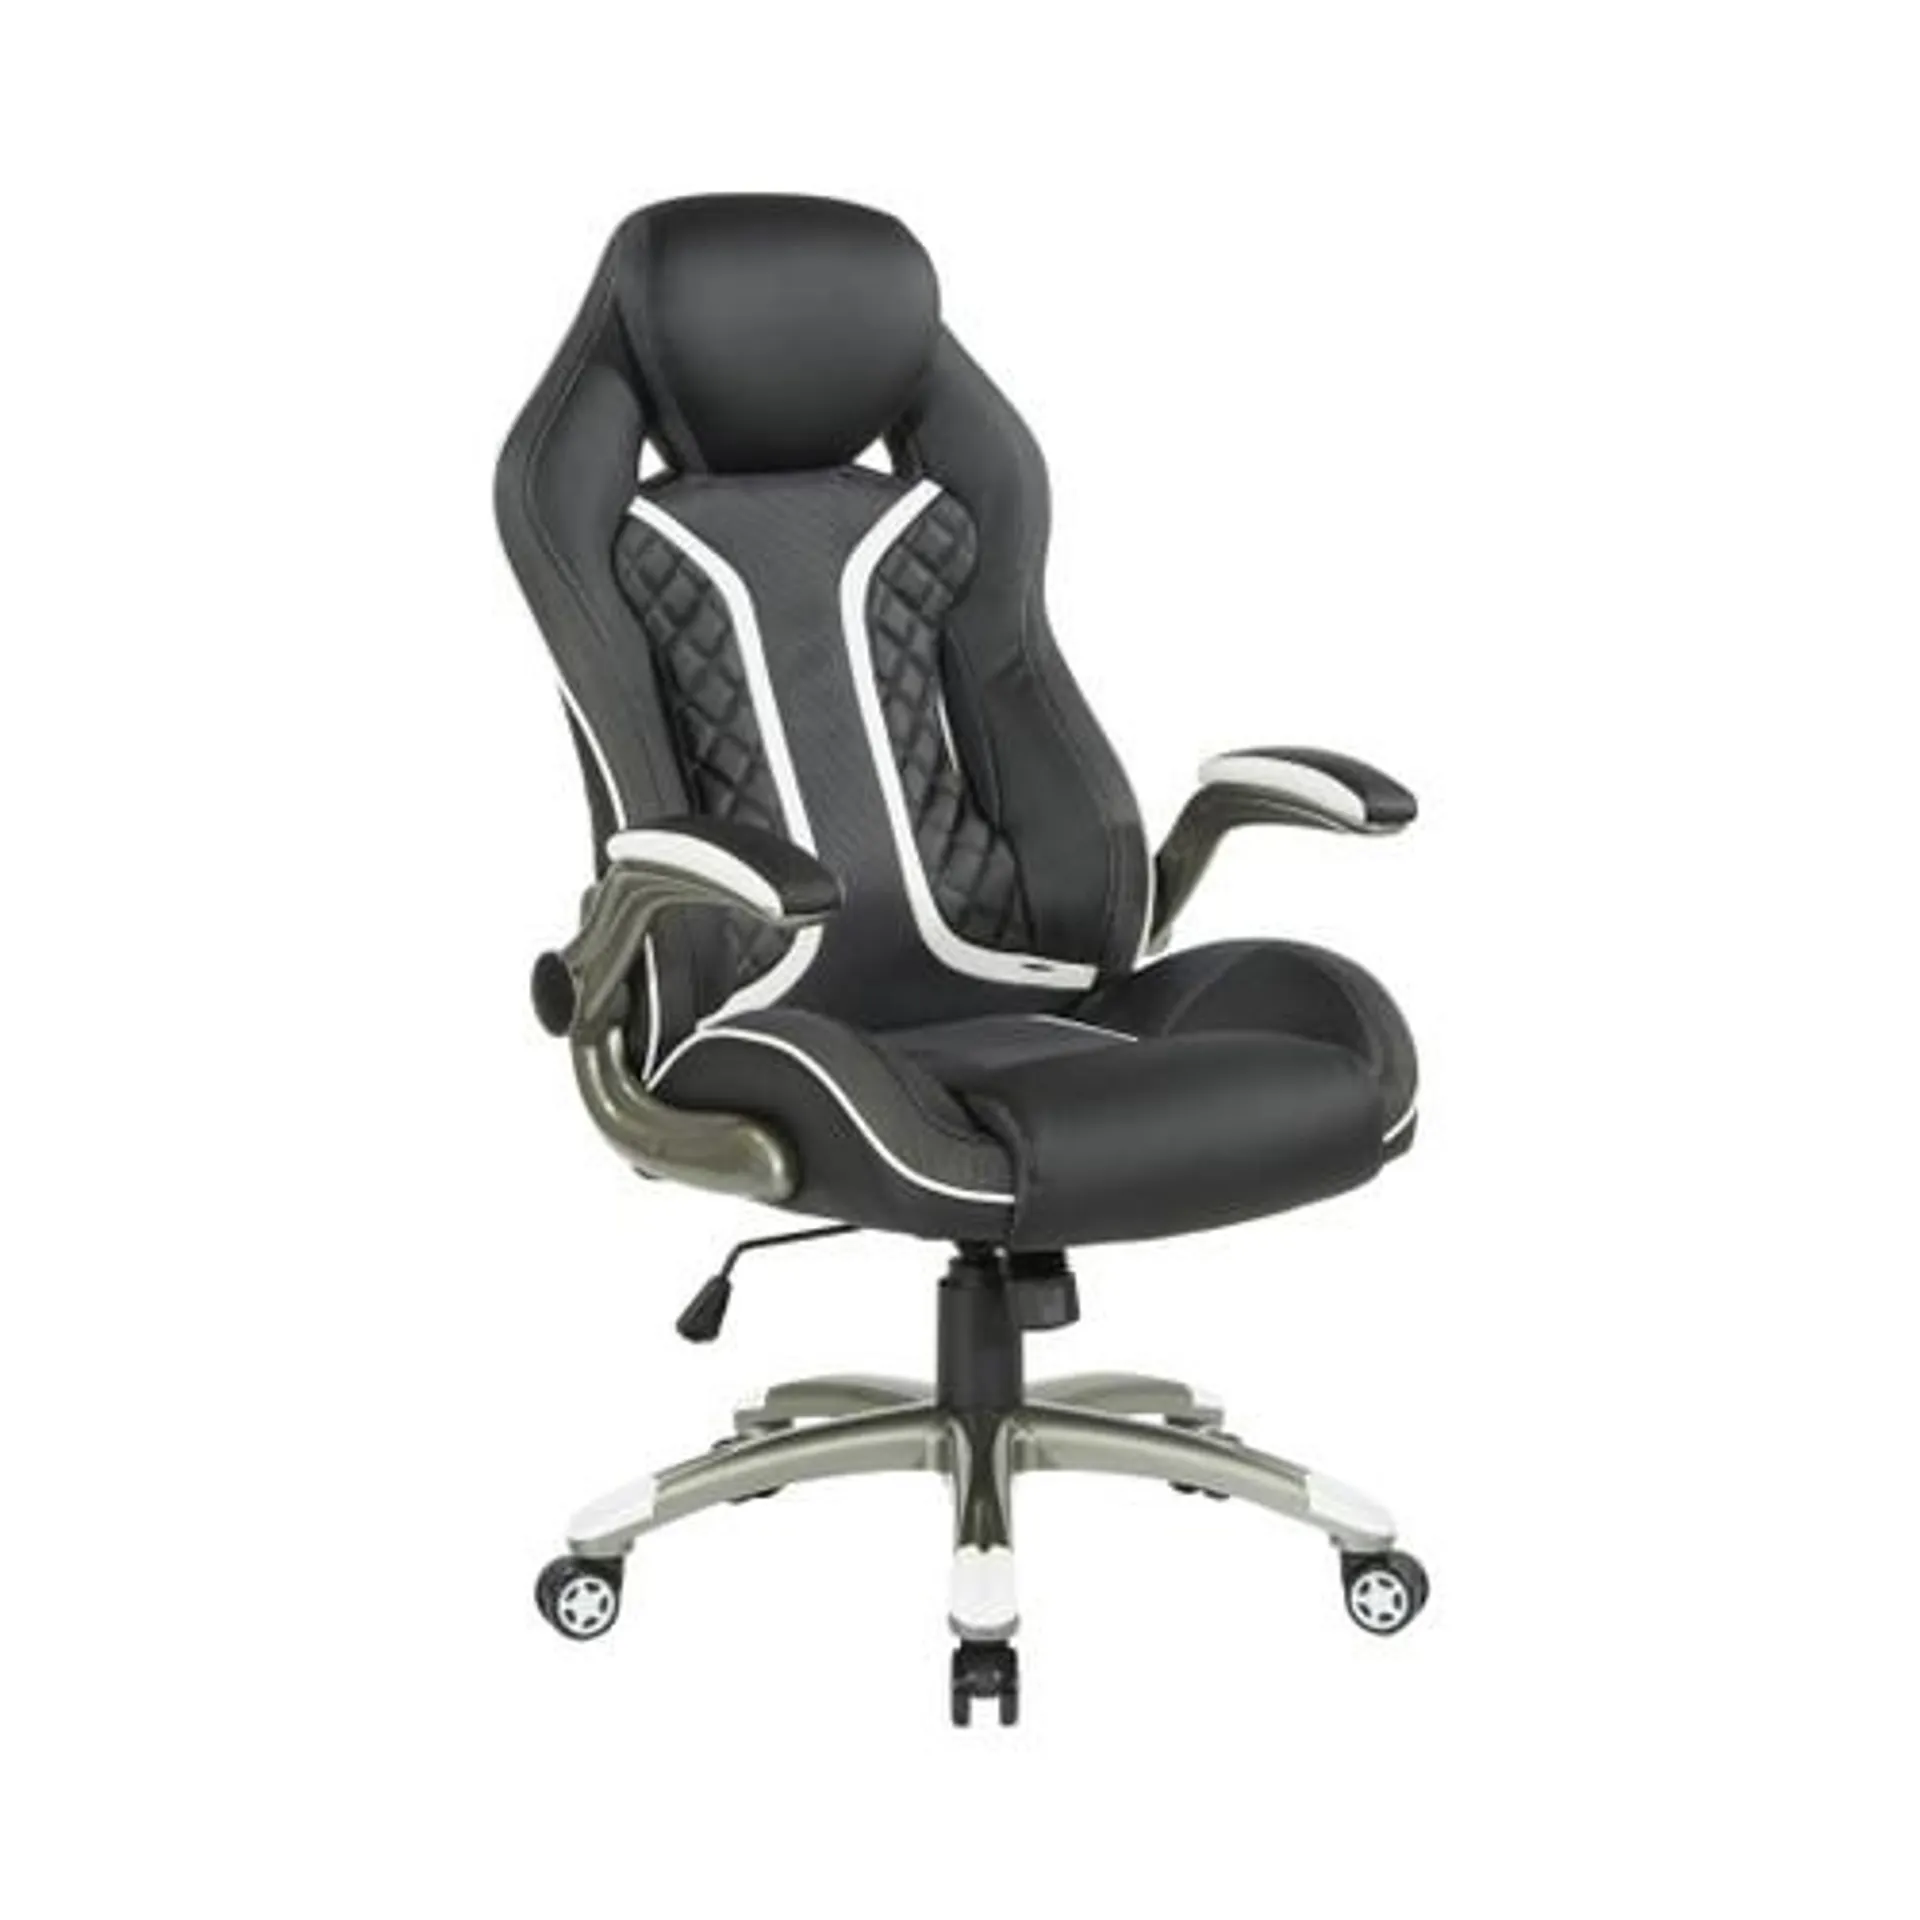 Xplorer 51 Gaming Chair in Faux Leather